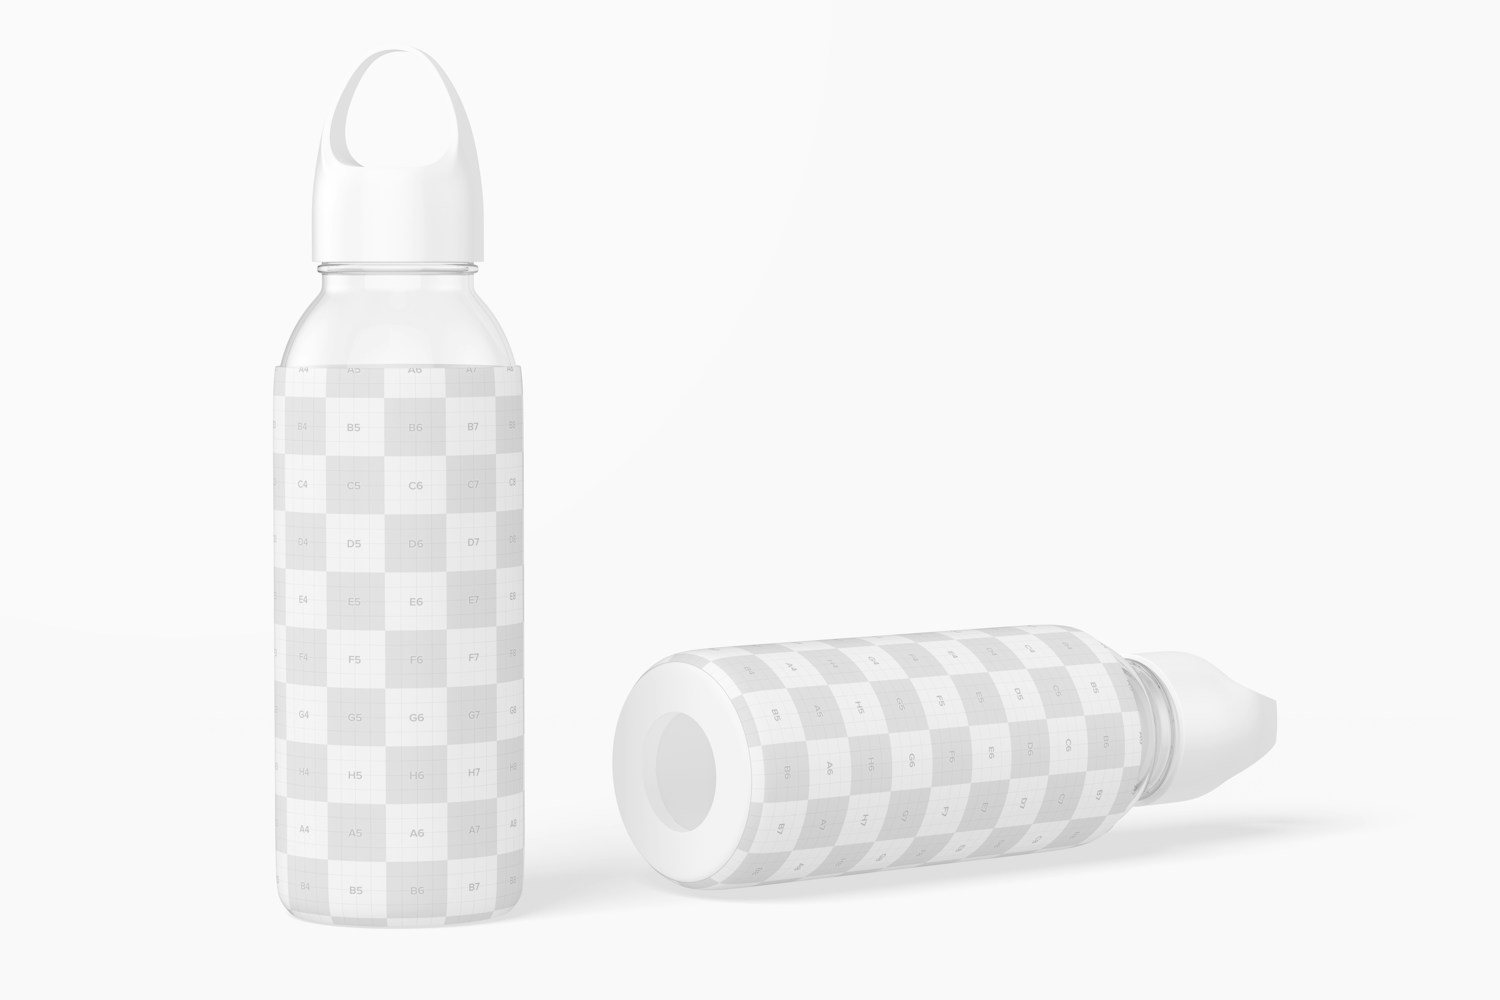 Water Bottles with Silicone Sleeve Mockup